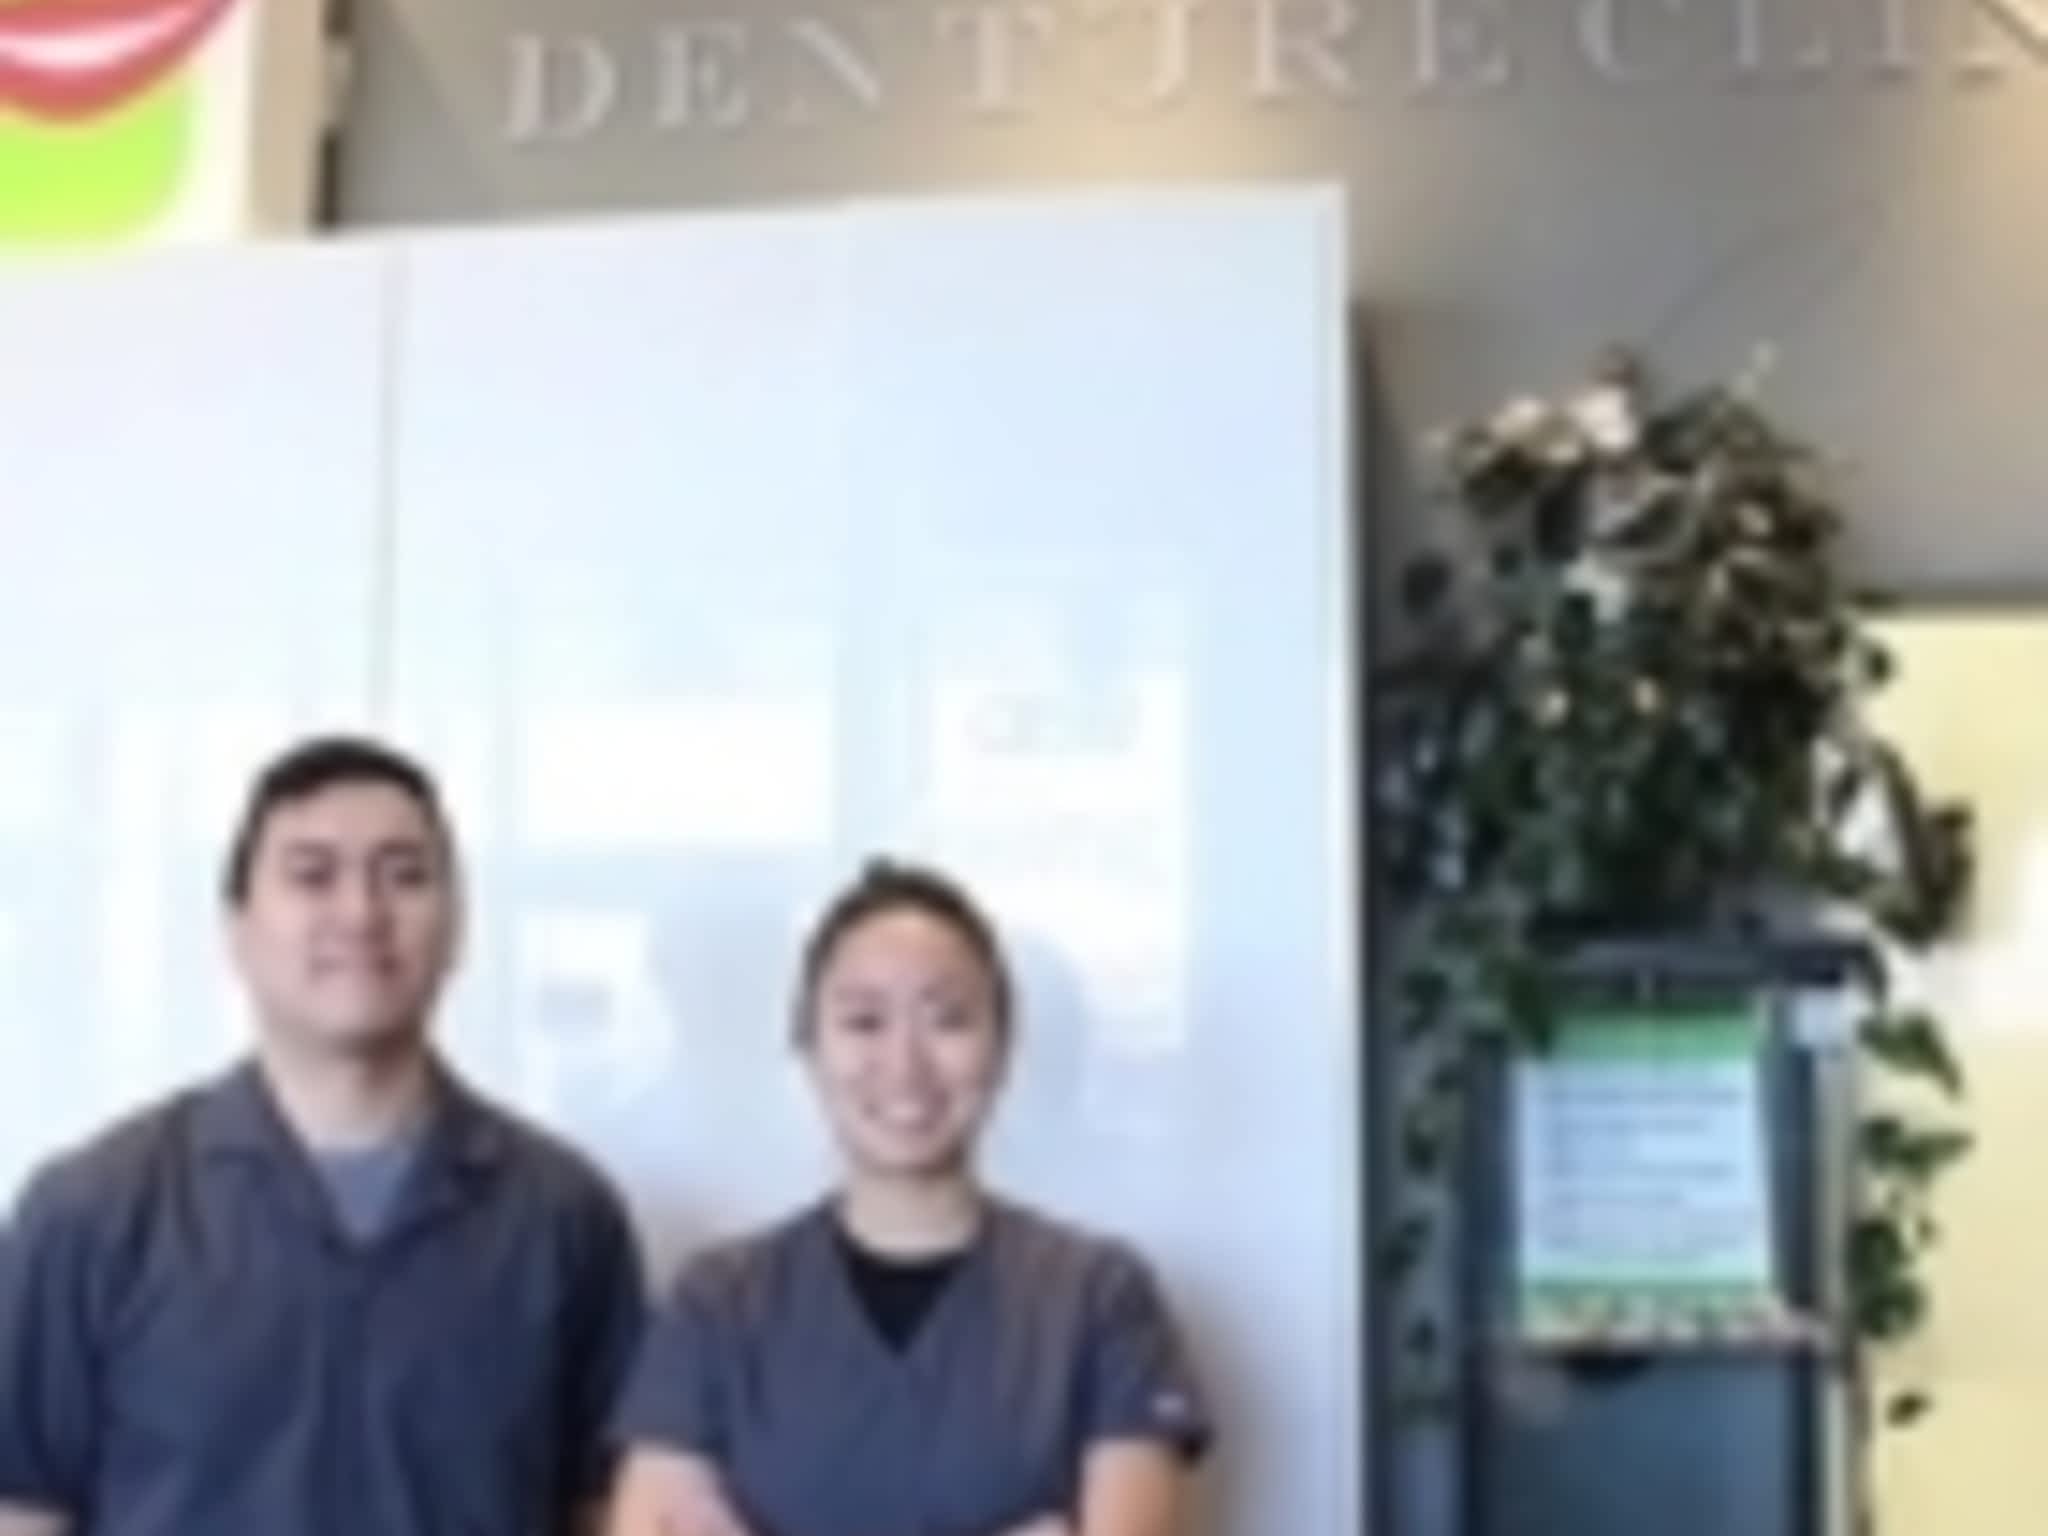 photo Great Smile Denture Clinic